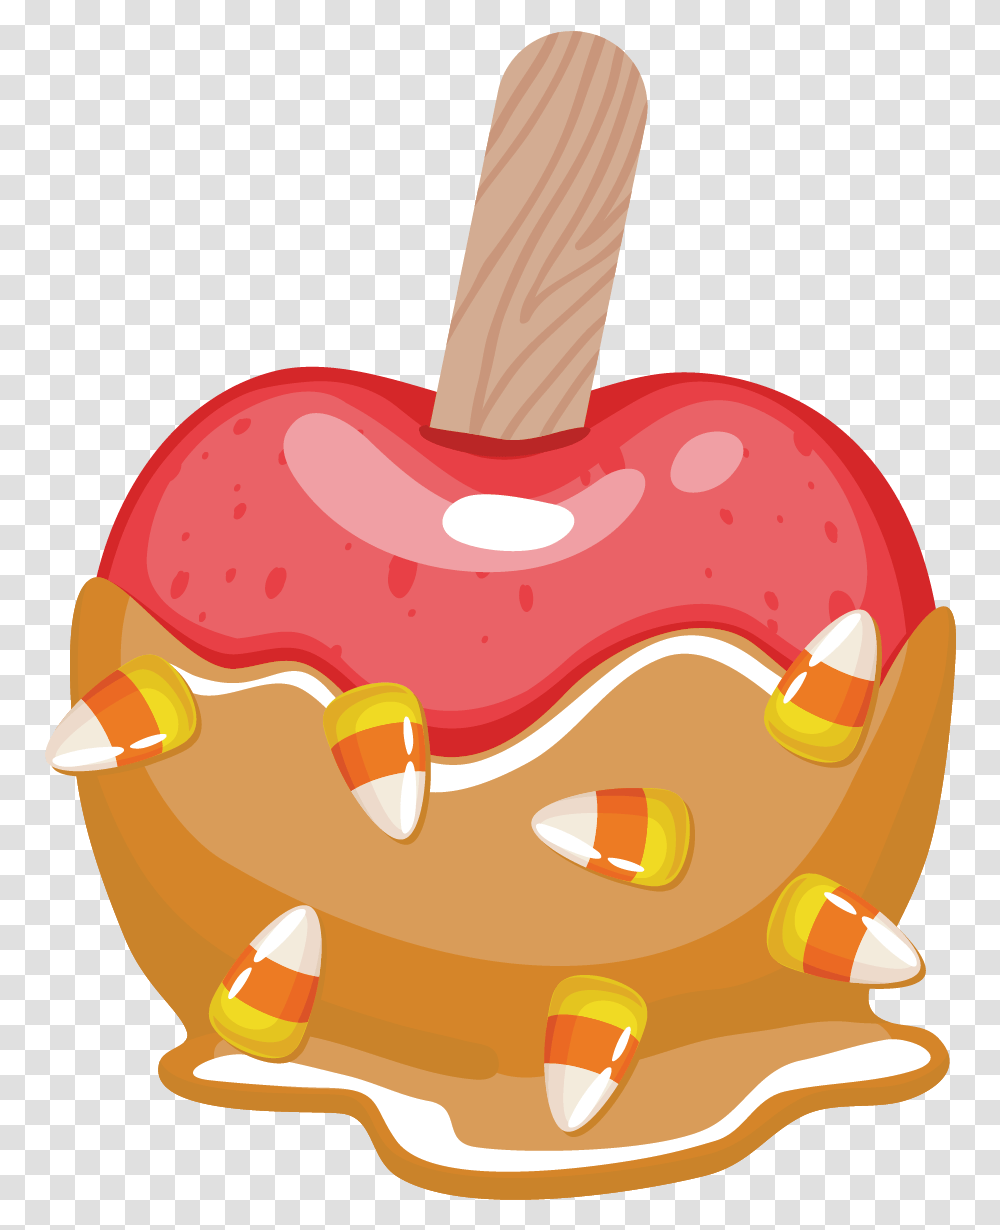 Indulge In A Caramel Apple Toppings Bar Festival Clipart Junk Food, Cream, Dessert, Creme, Ice Pop Transparent Png